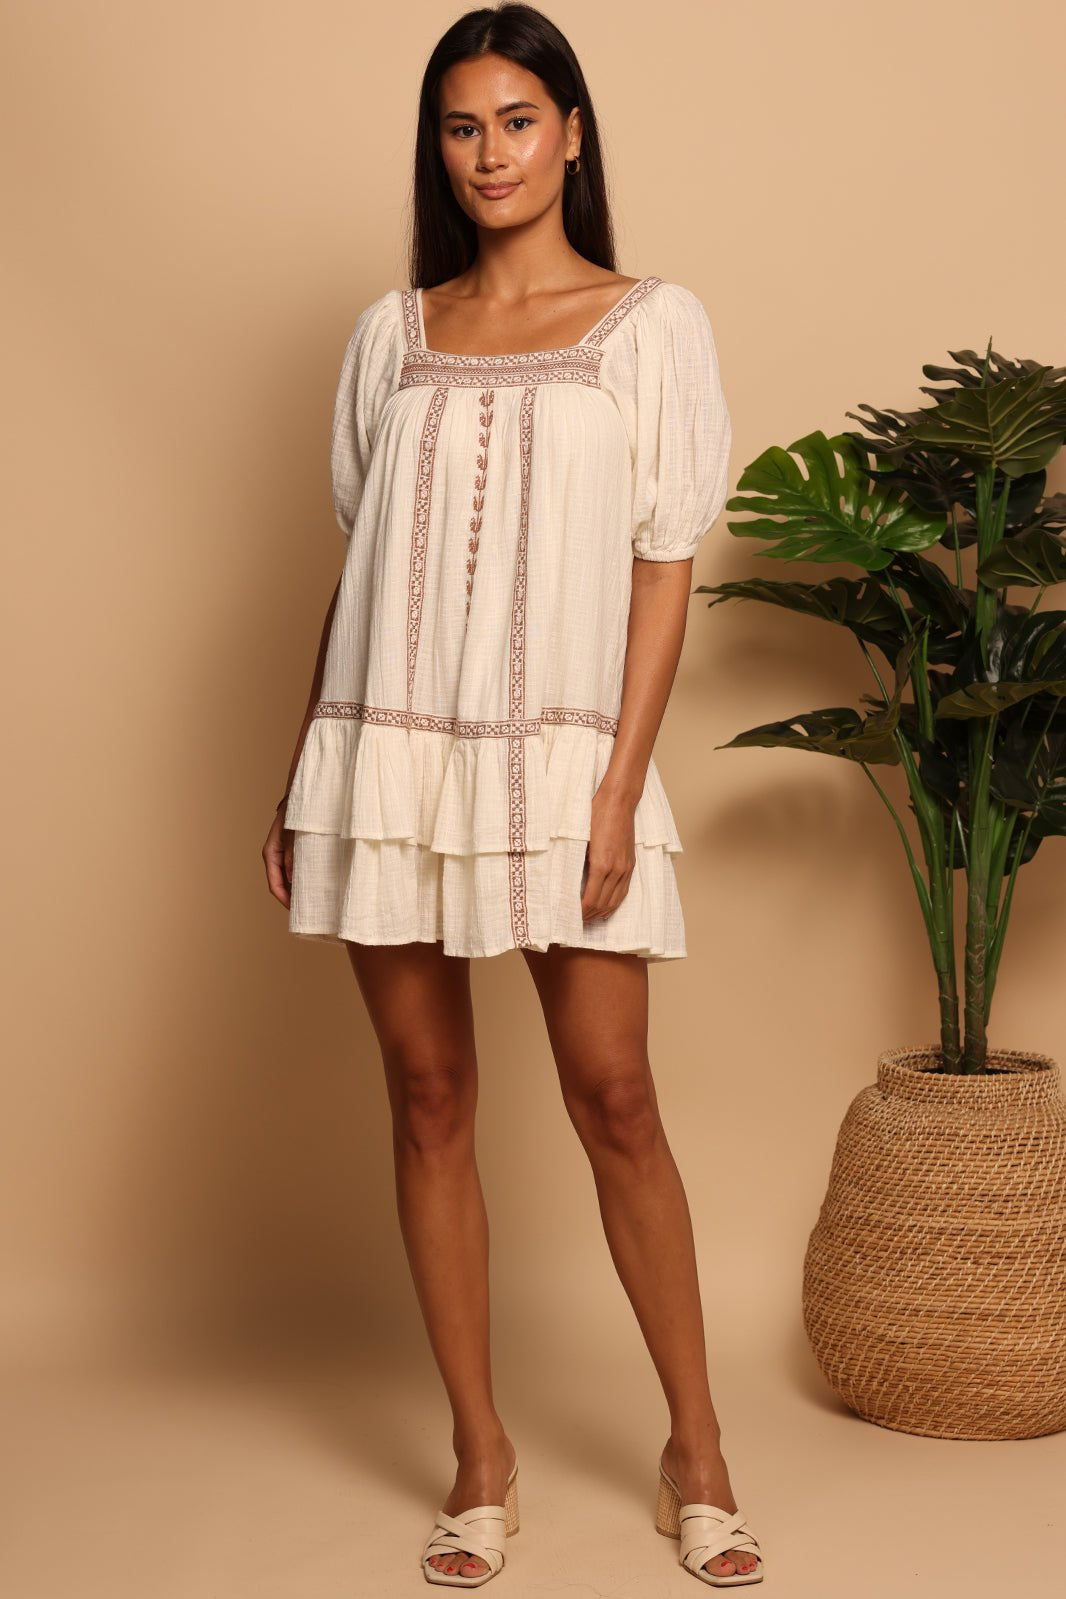 SQUARE NECK BABYDOLL DRESS - SAND EMBROIDERY - XS